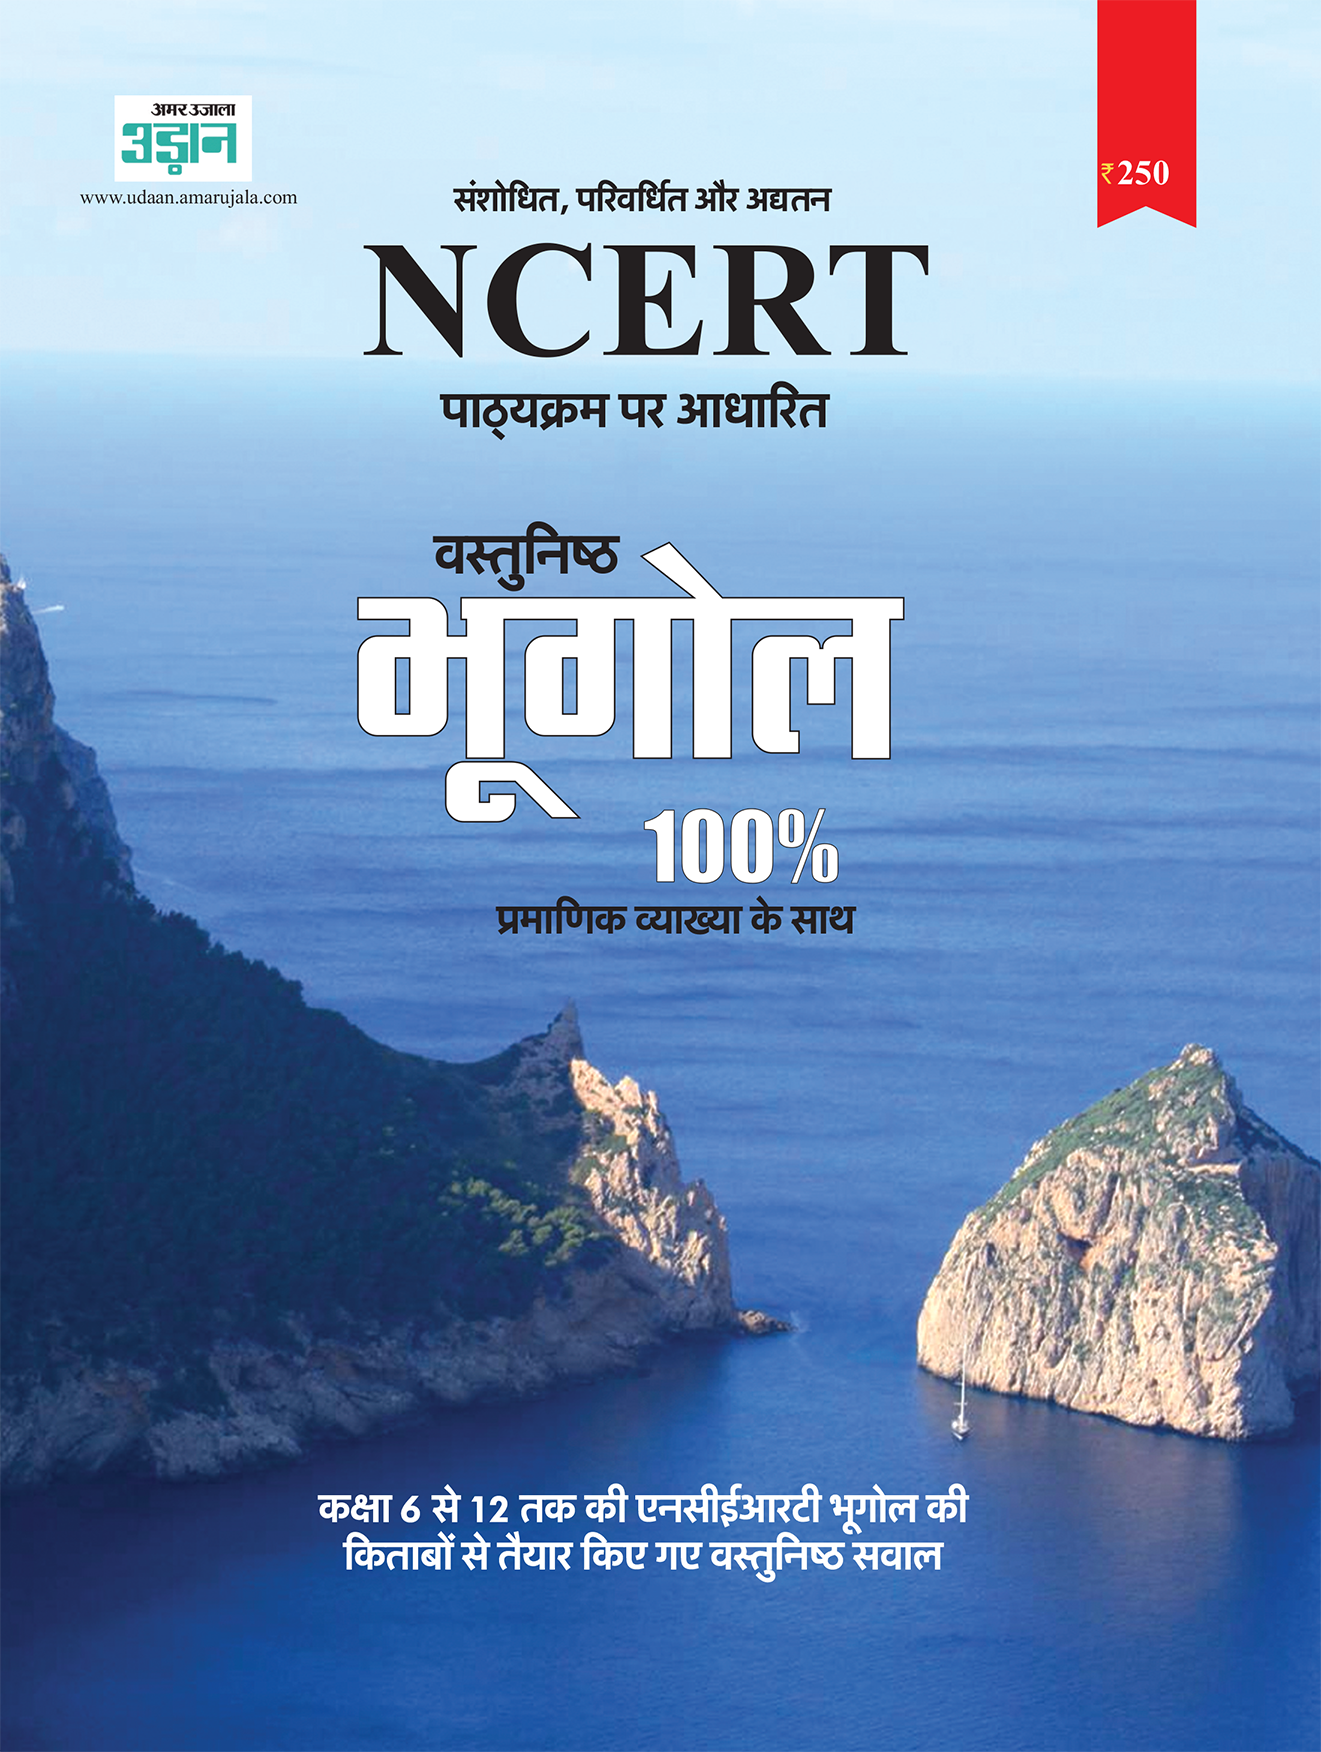 NCERT-COVER&BACK COVER PAGE